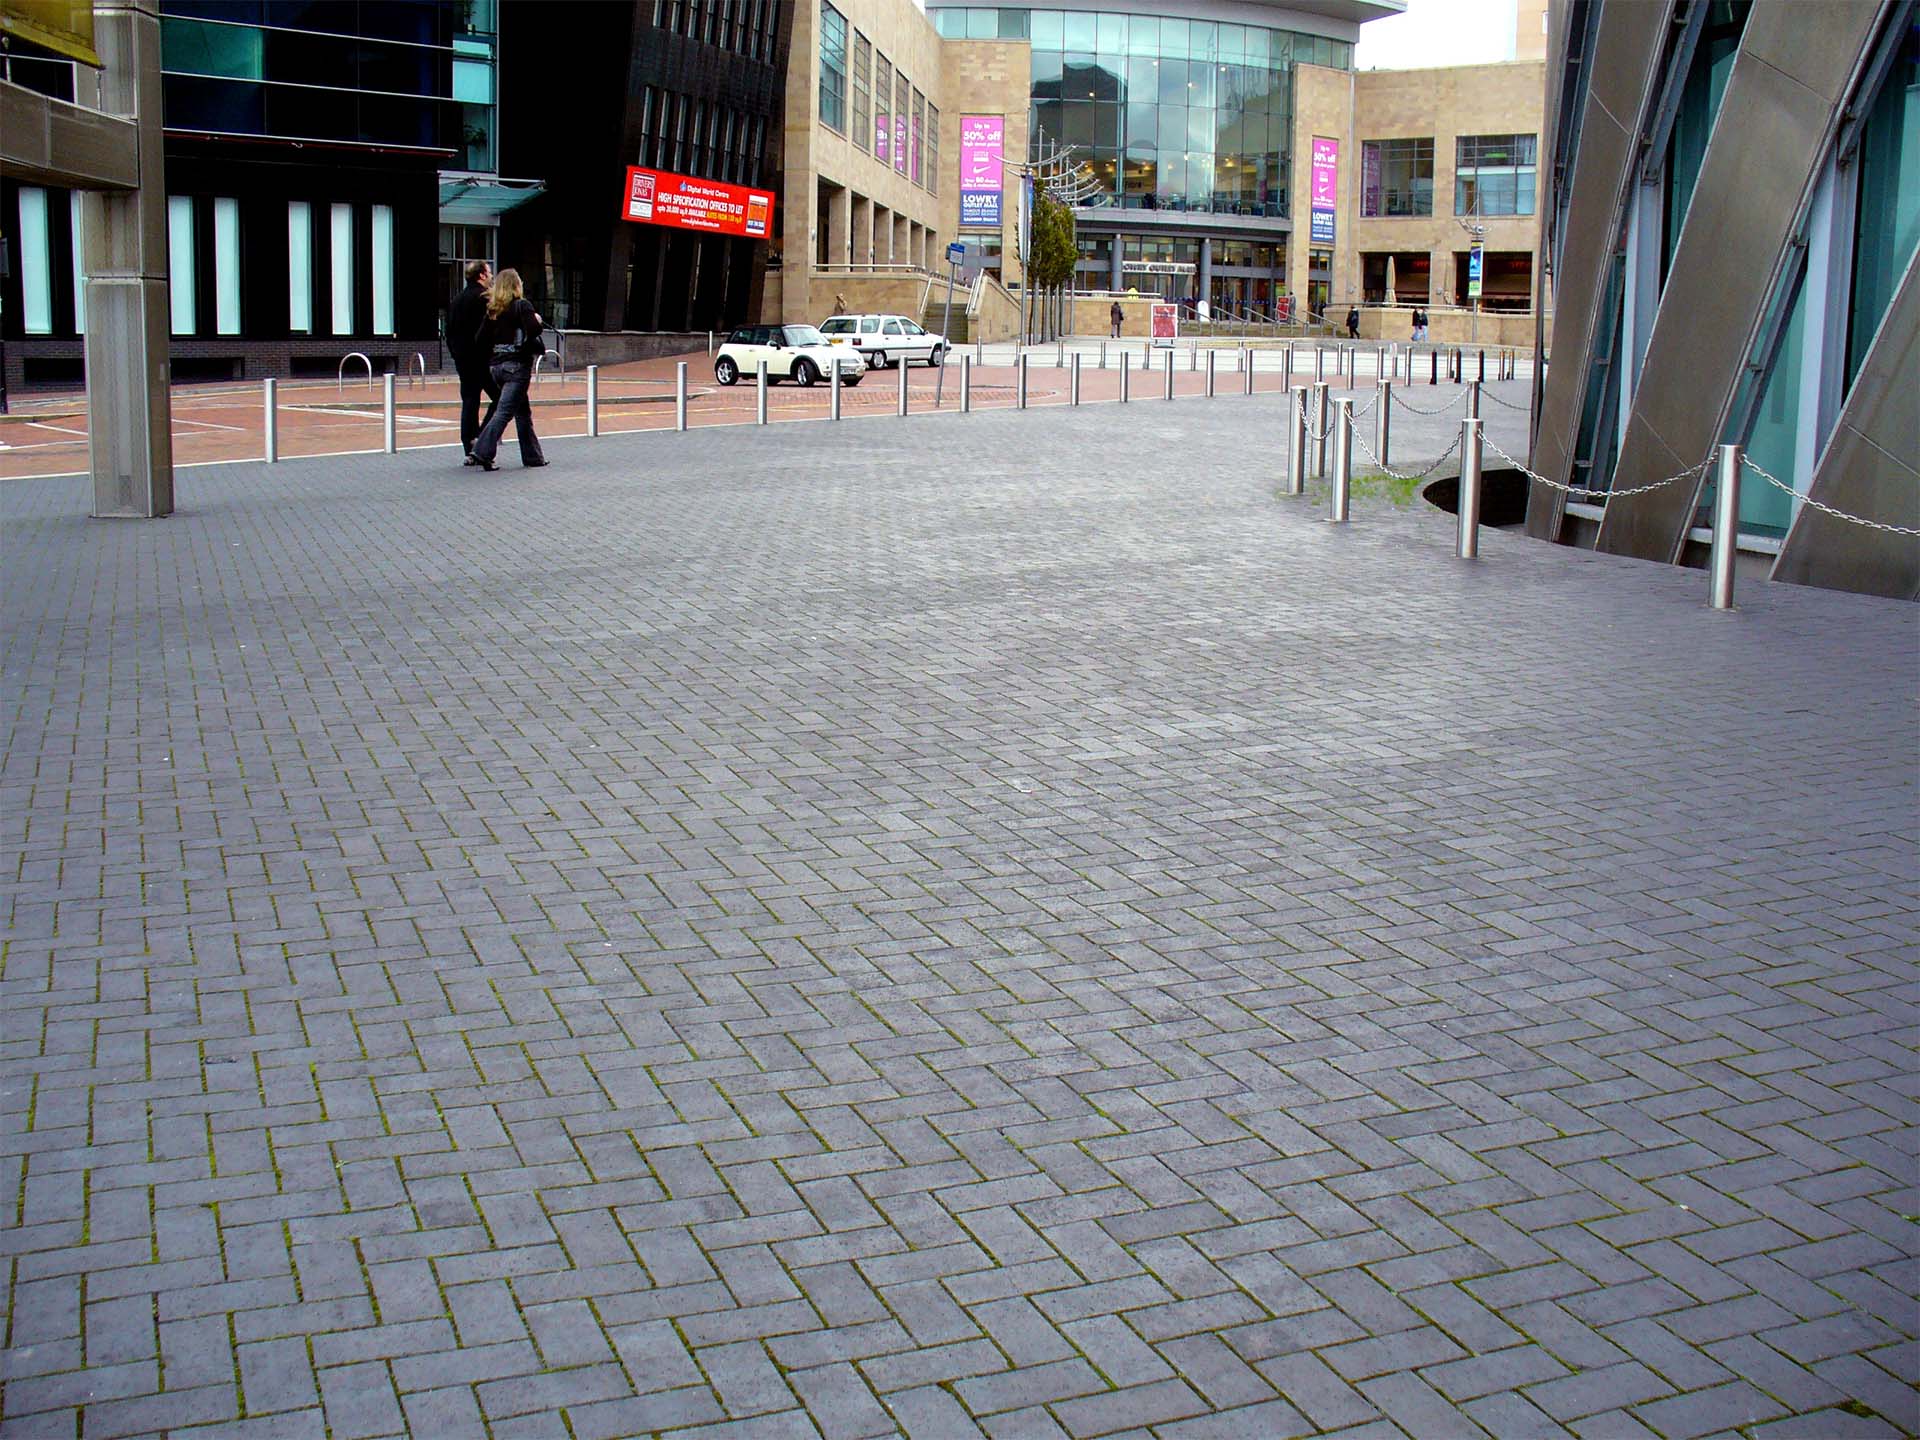 Ketley Blue Staffs Blue Pavers at the Lowry Centre in Manchester